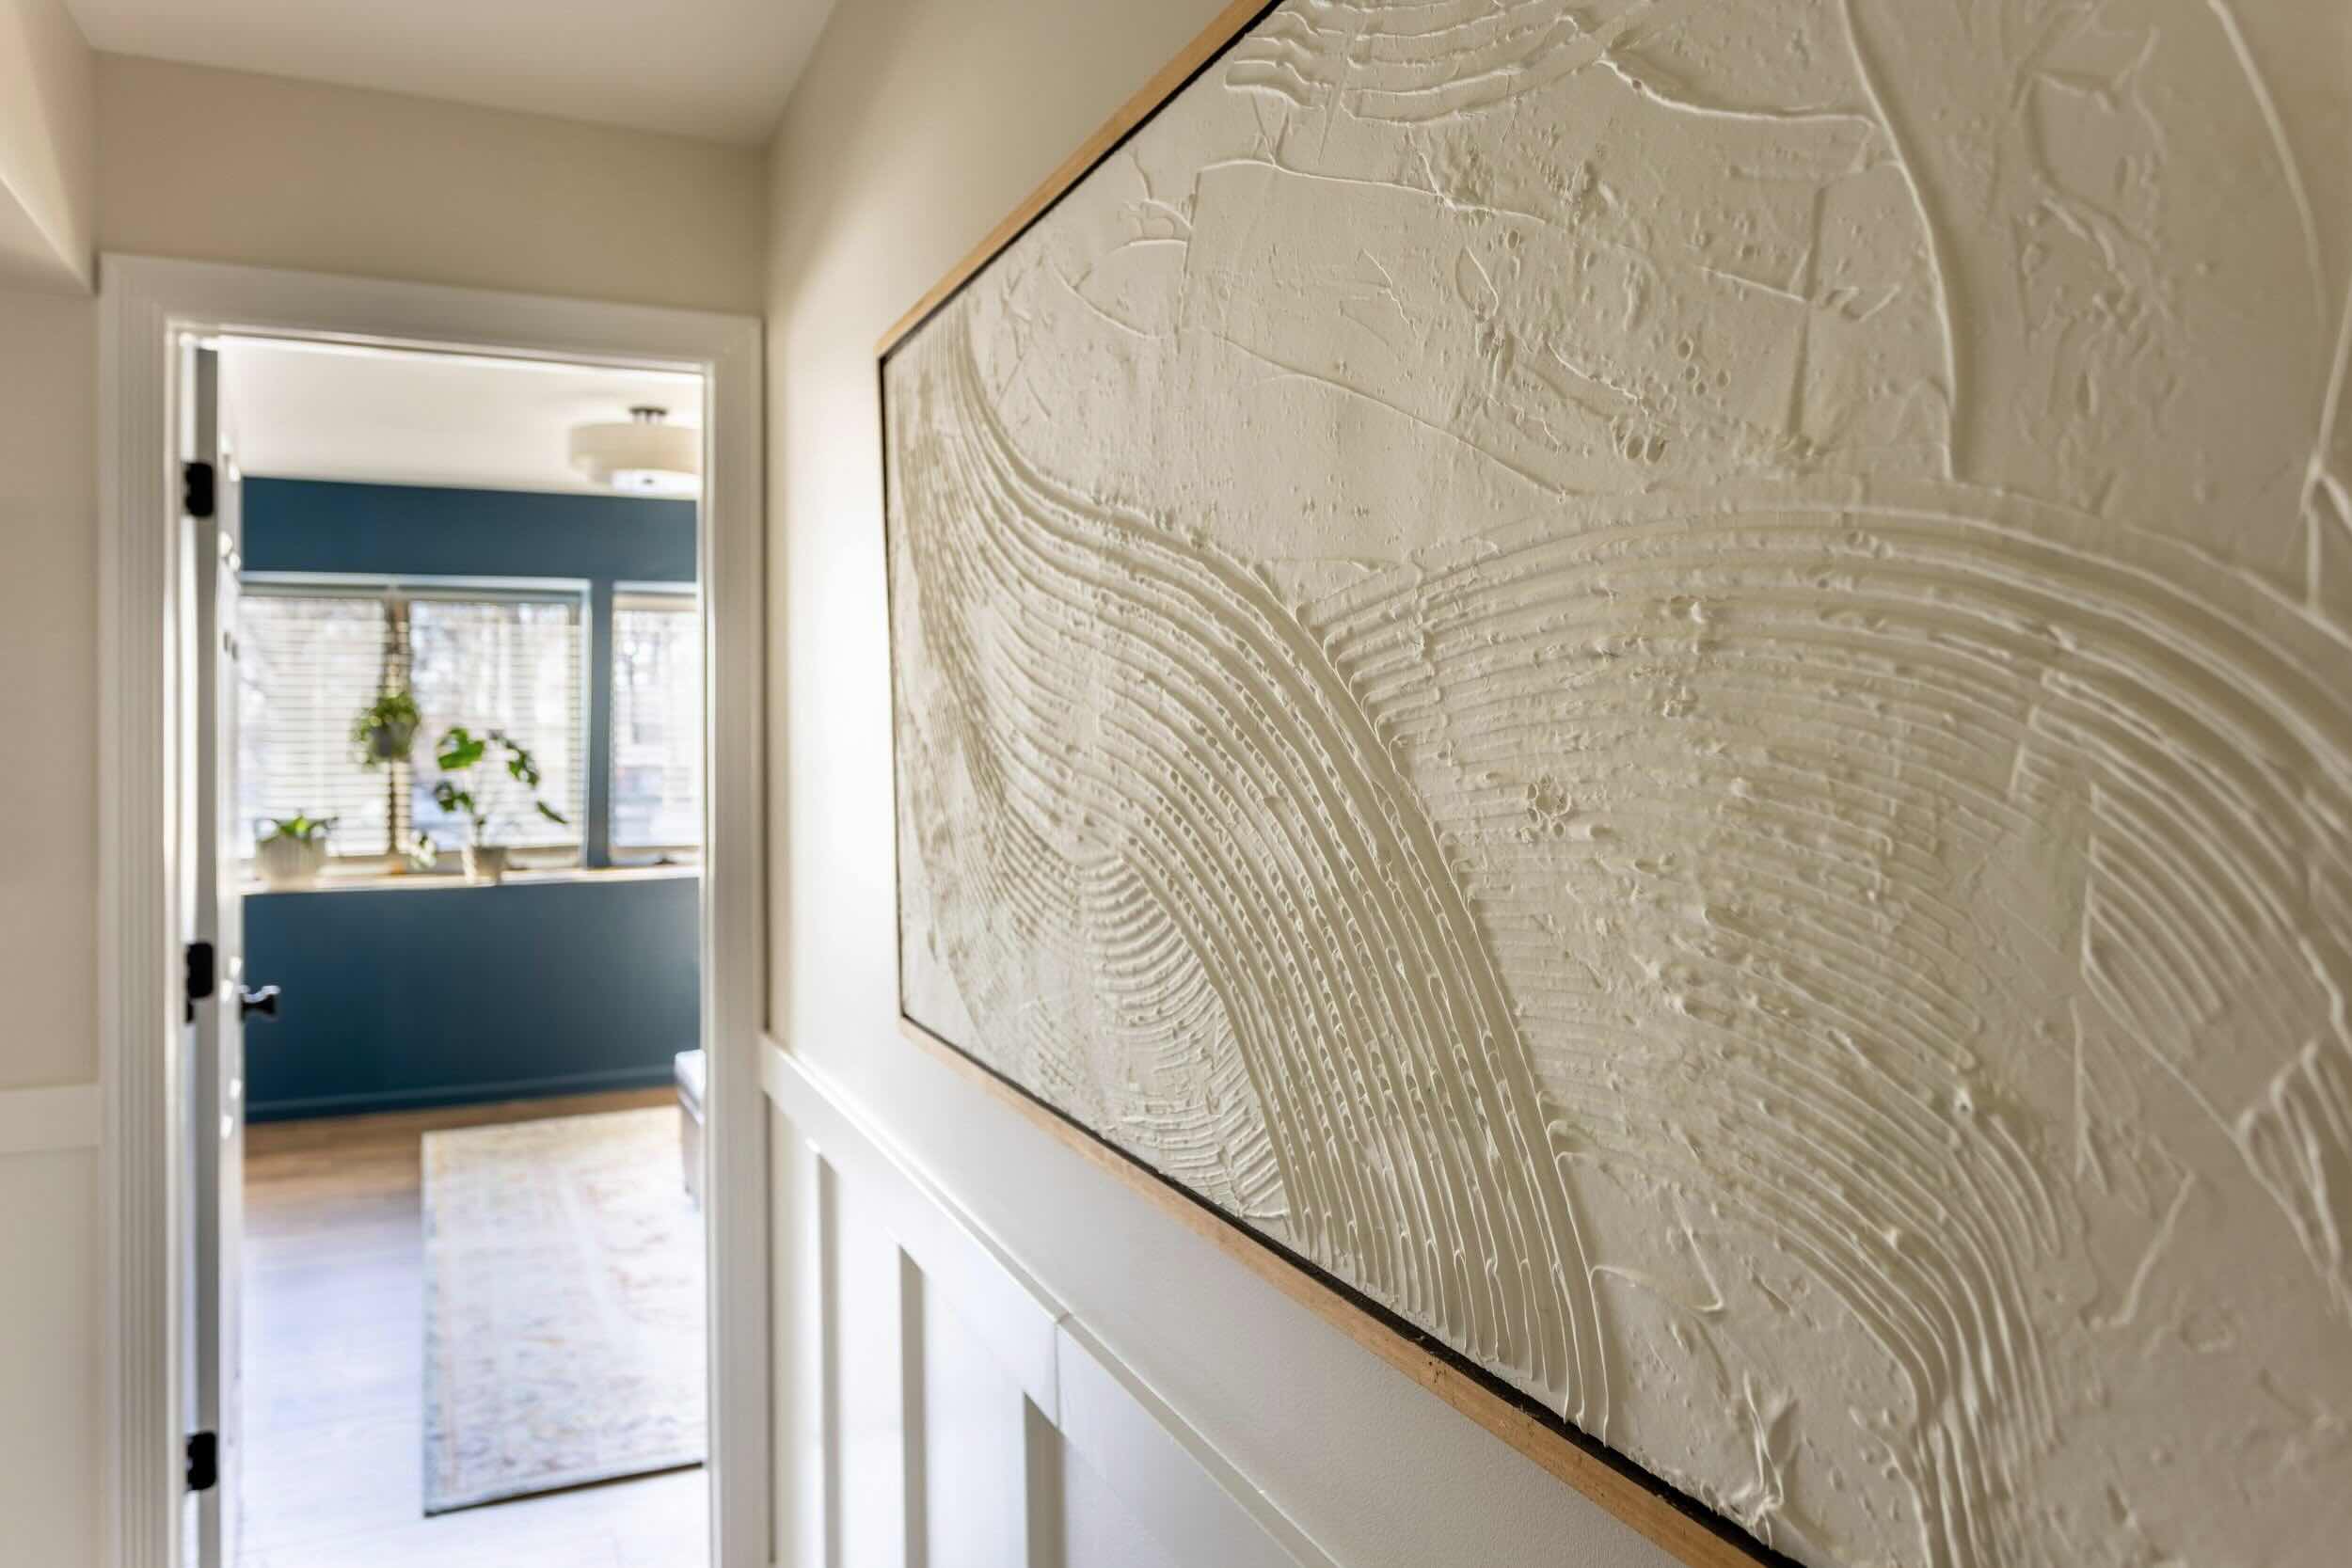 How To Make Plaster Wall Art